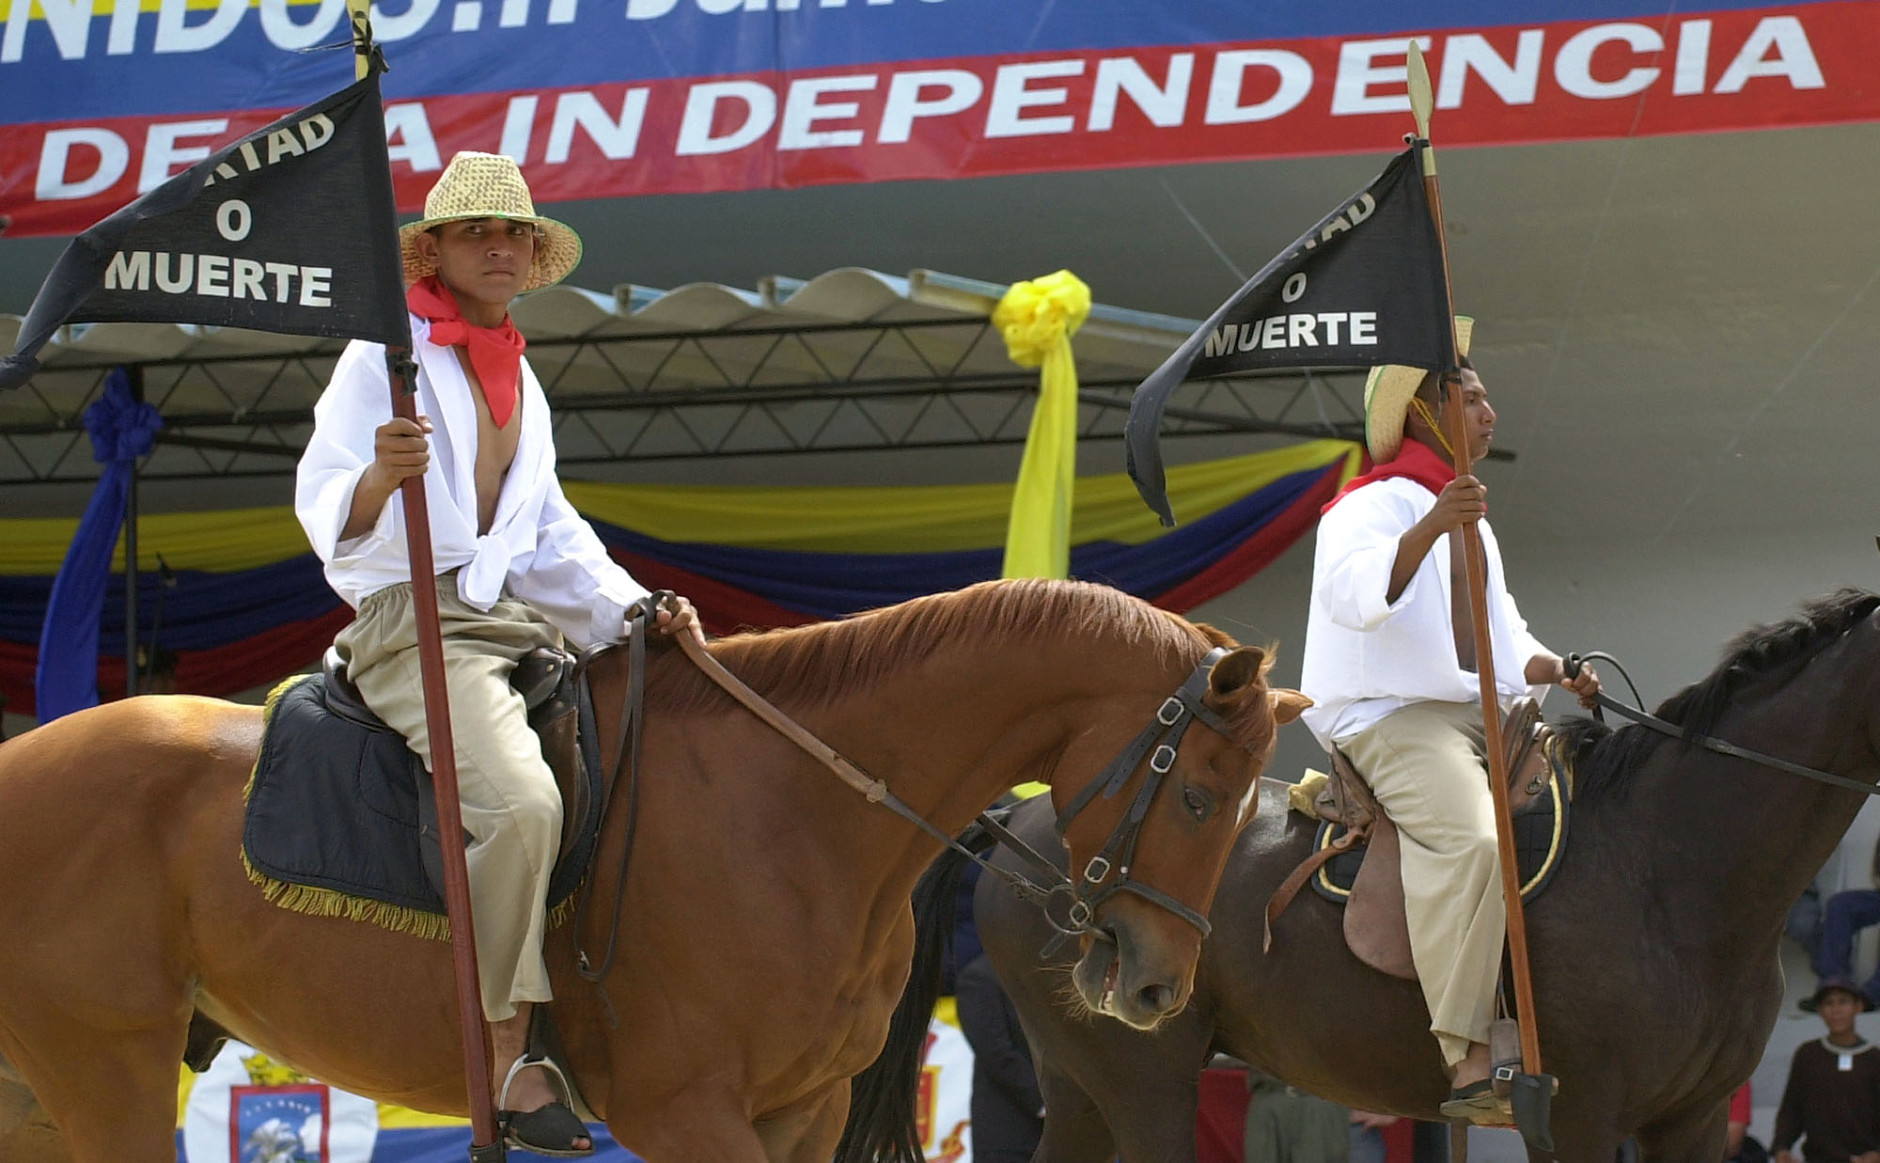 Soldiers dressed as armed peasants who fought for Venezuela's independence ride horses and hold flags reading "Freedom or death" in a military parade to celebrate  Venezuelan Independence Day in Fuerte Tiuna military base in Caracas, Venezuela, Saturday, July 5, 2003. Venezuela was the first South American country to declare its independence from Spain in 1811. (AP Photo/Leslie Mazoch)